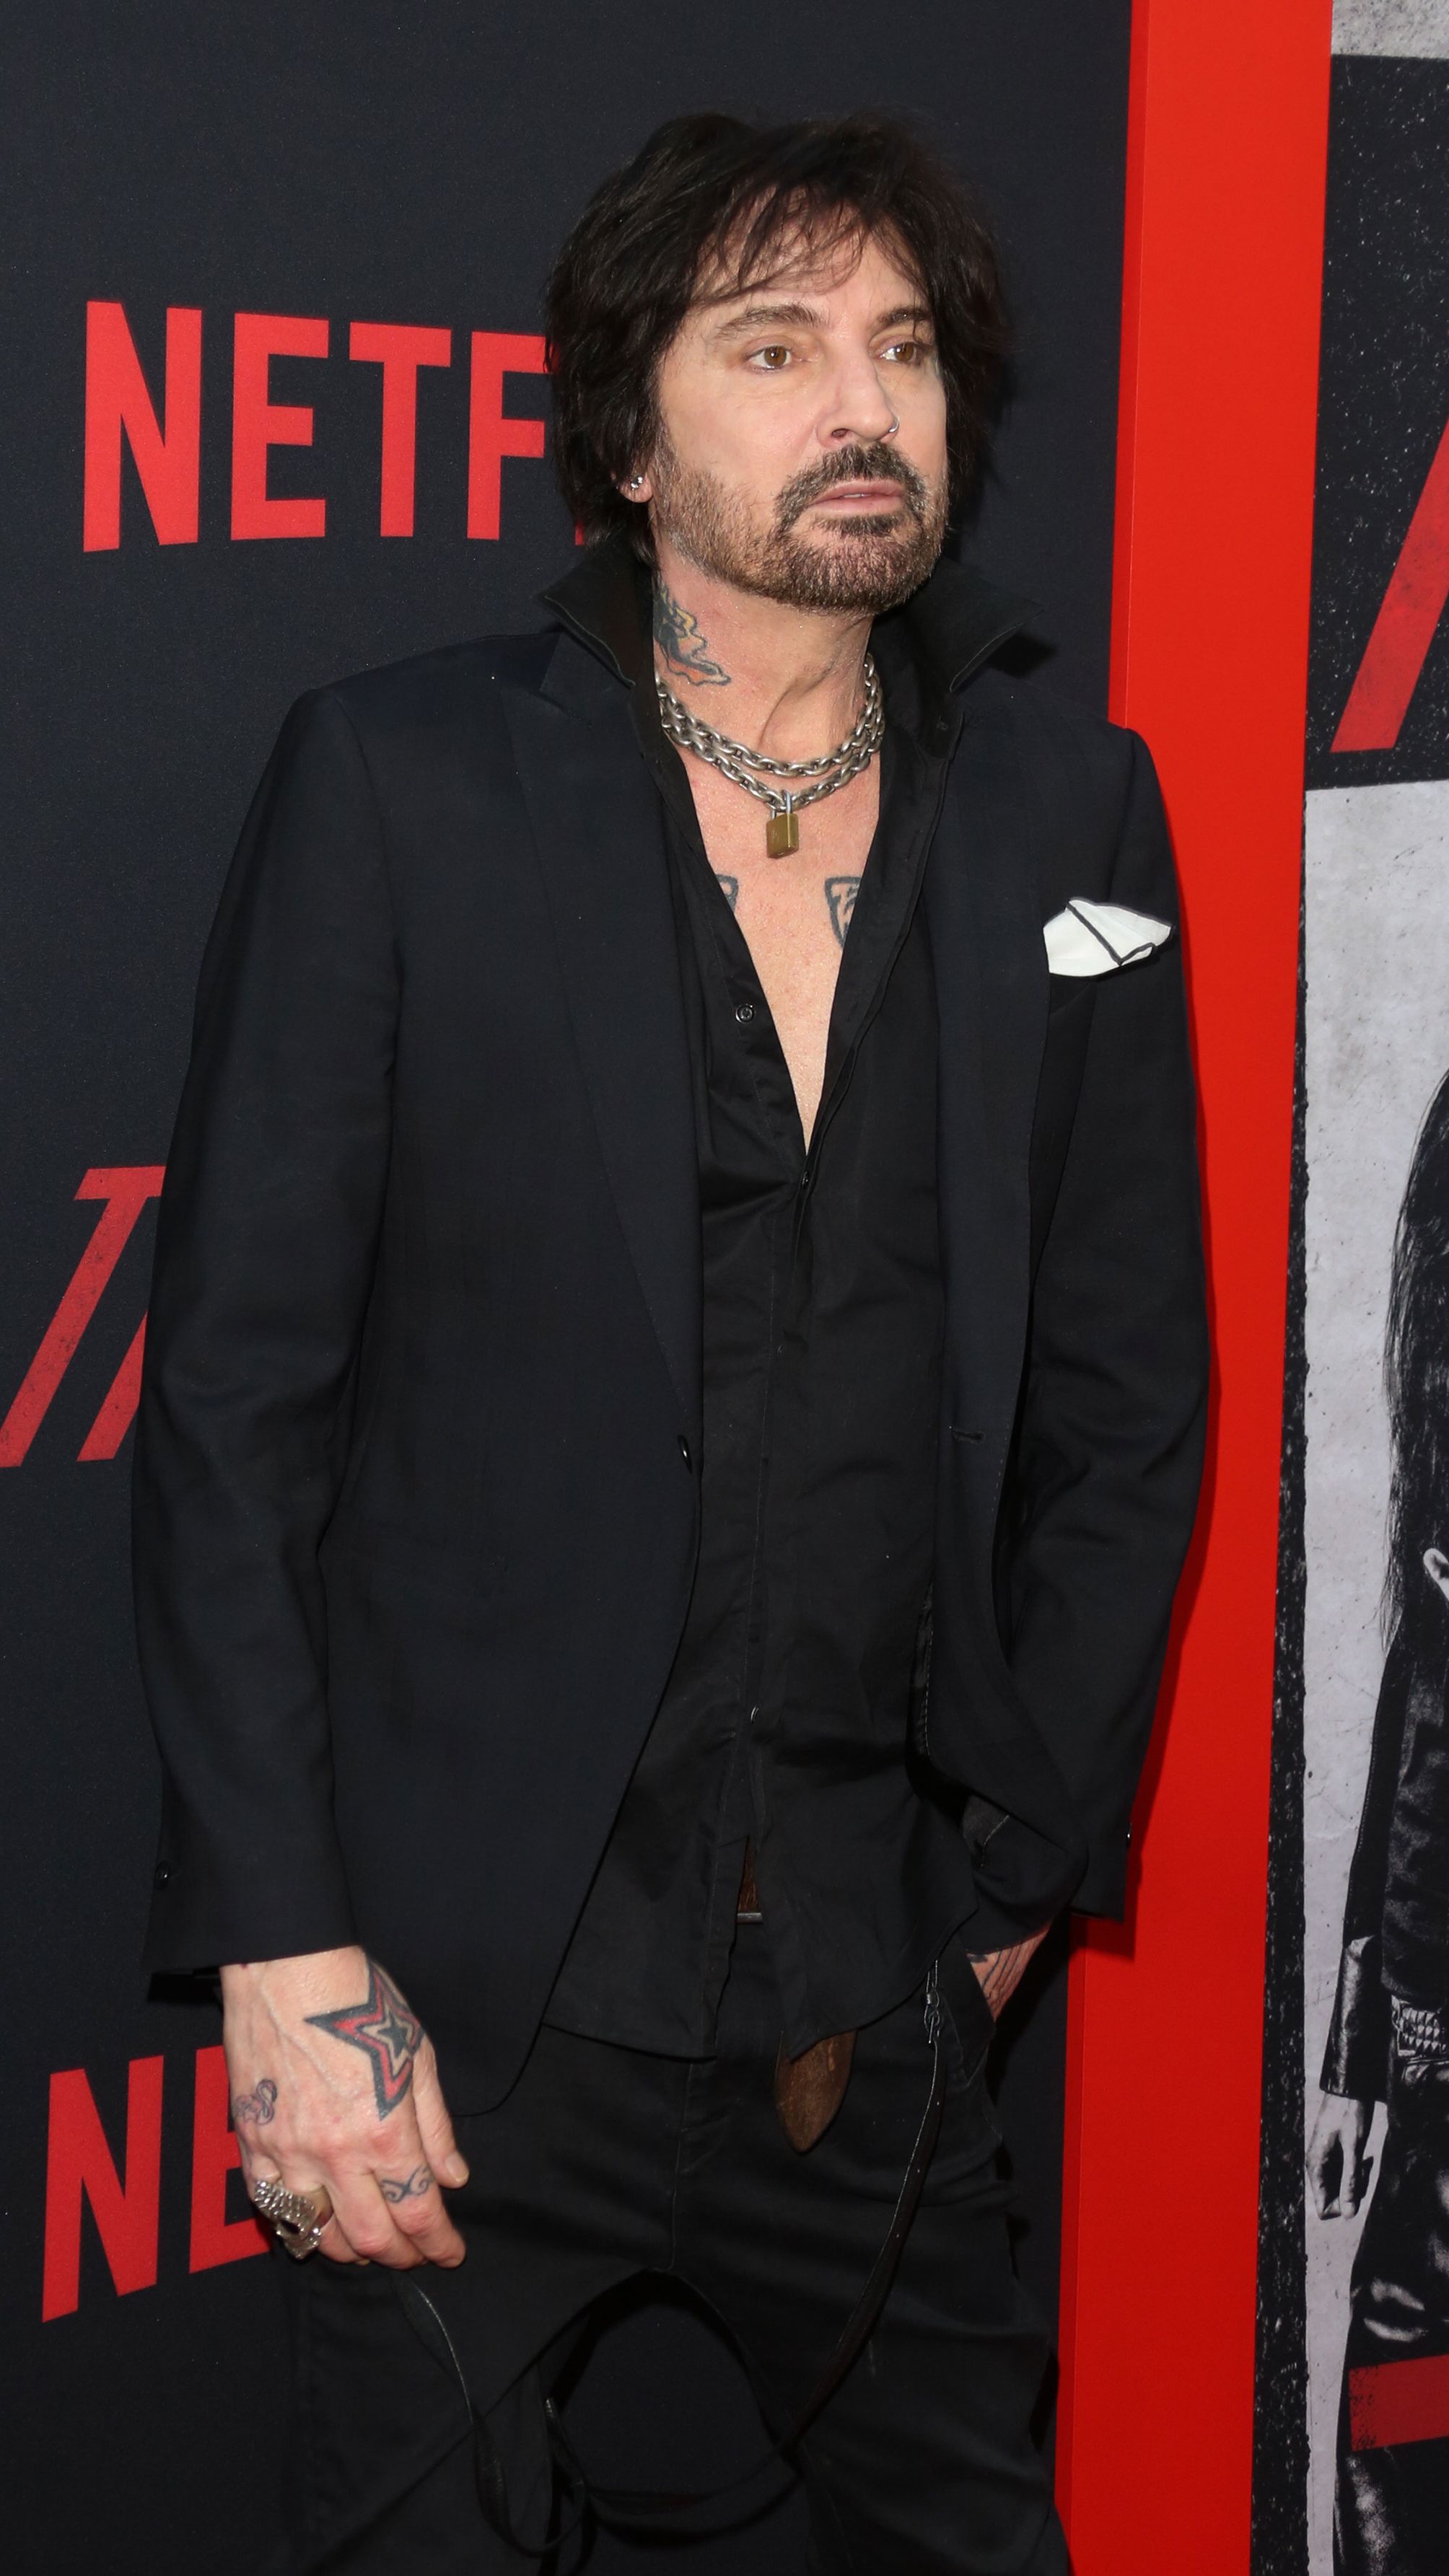 Tommy Lee's nude photo sparks accusations of double standards | CNN